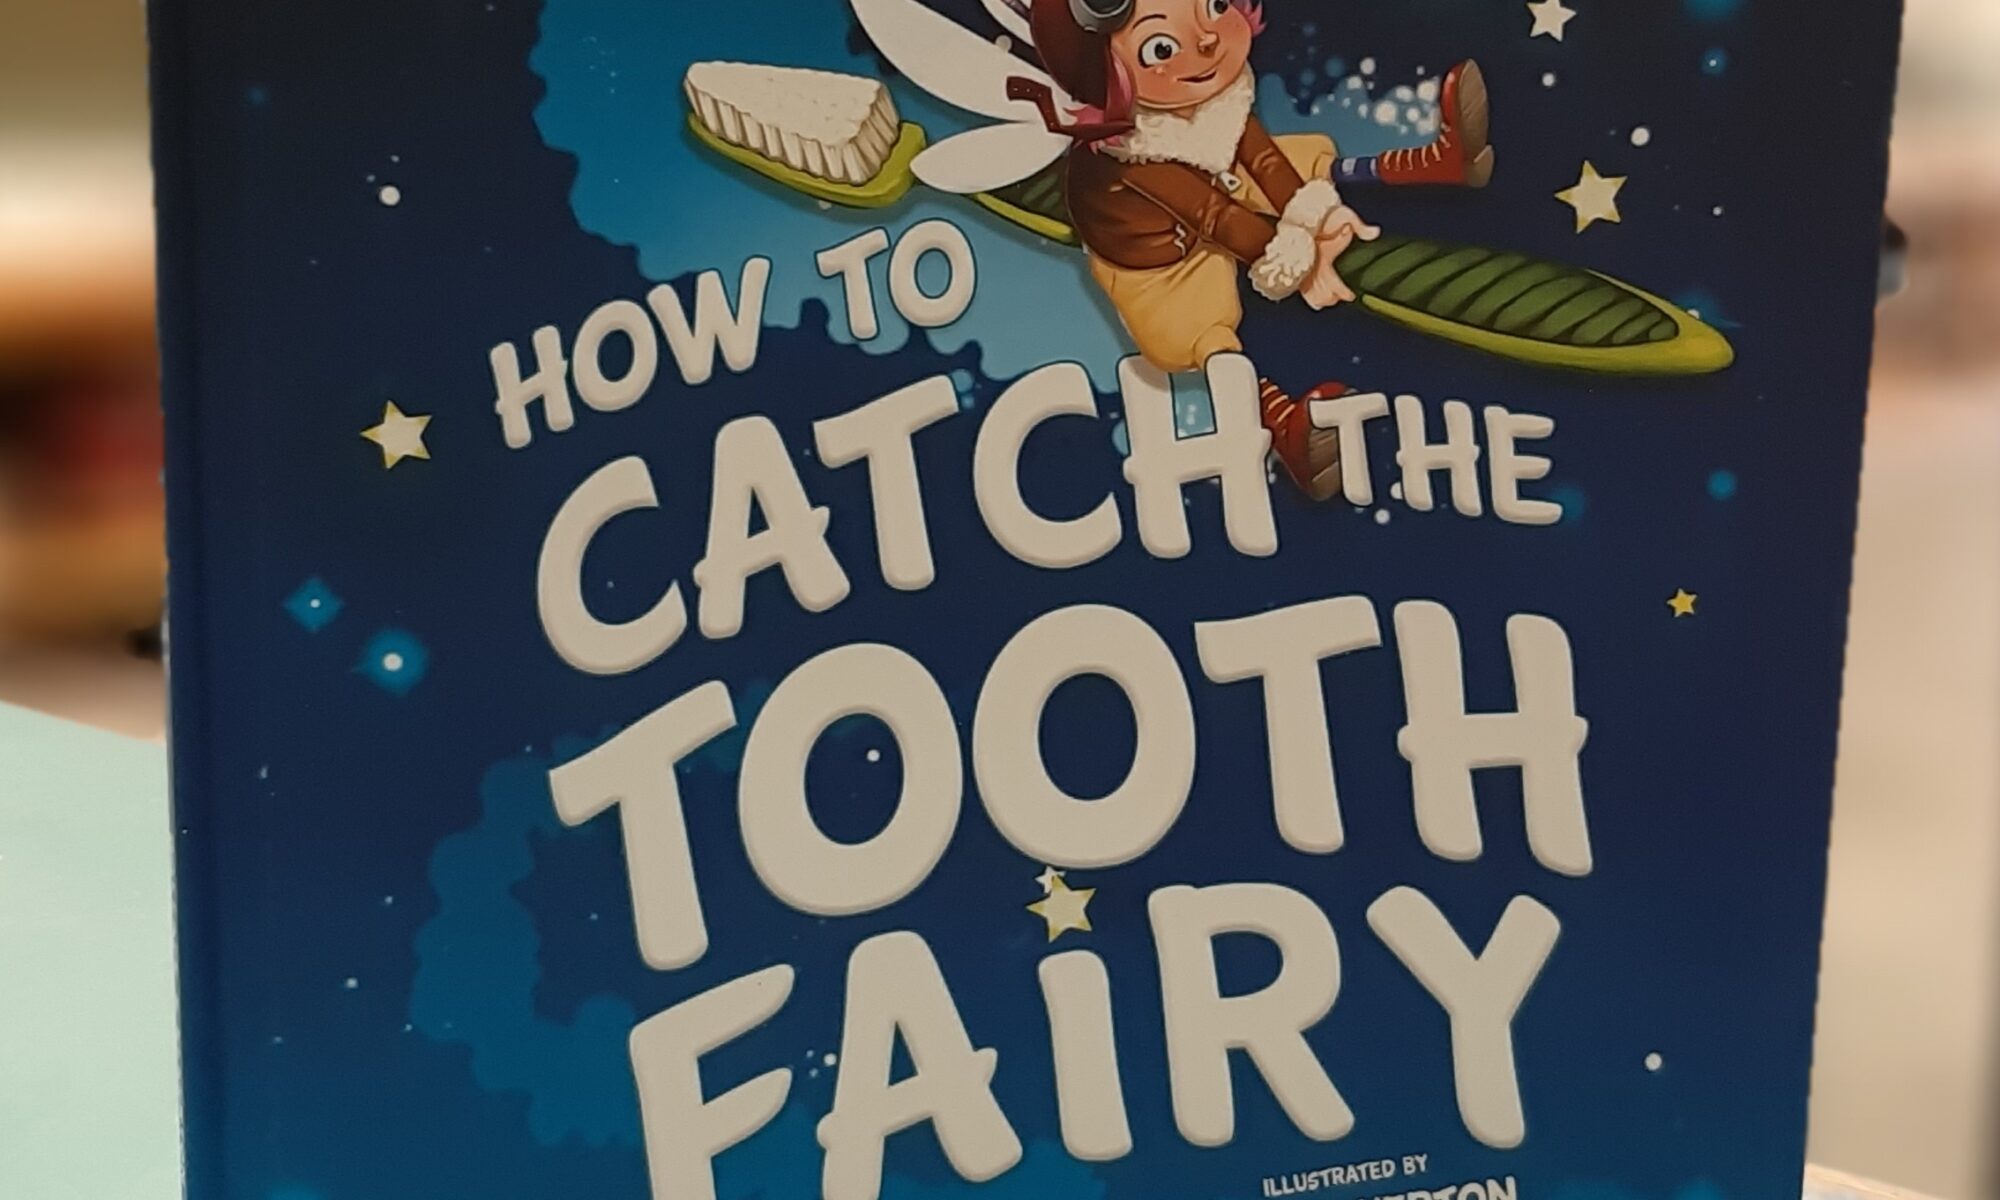 How to Catch the Tooth Fairy